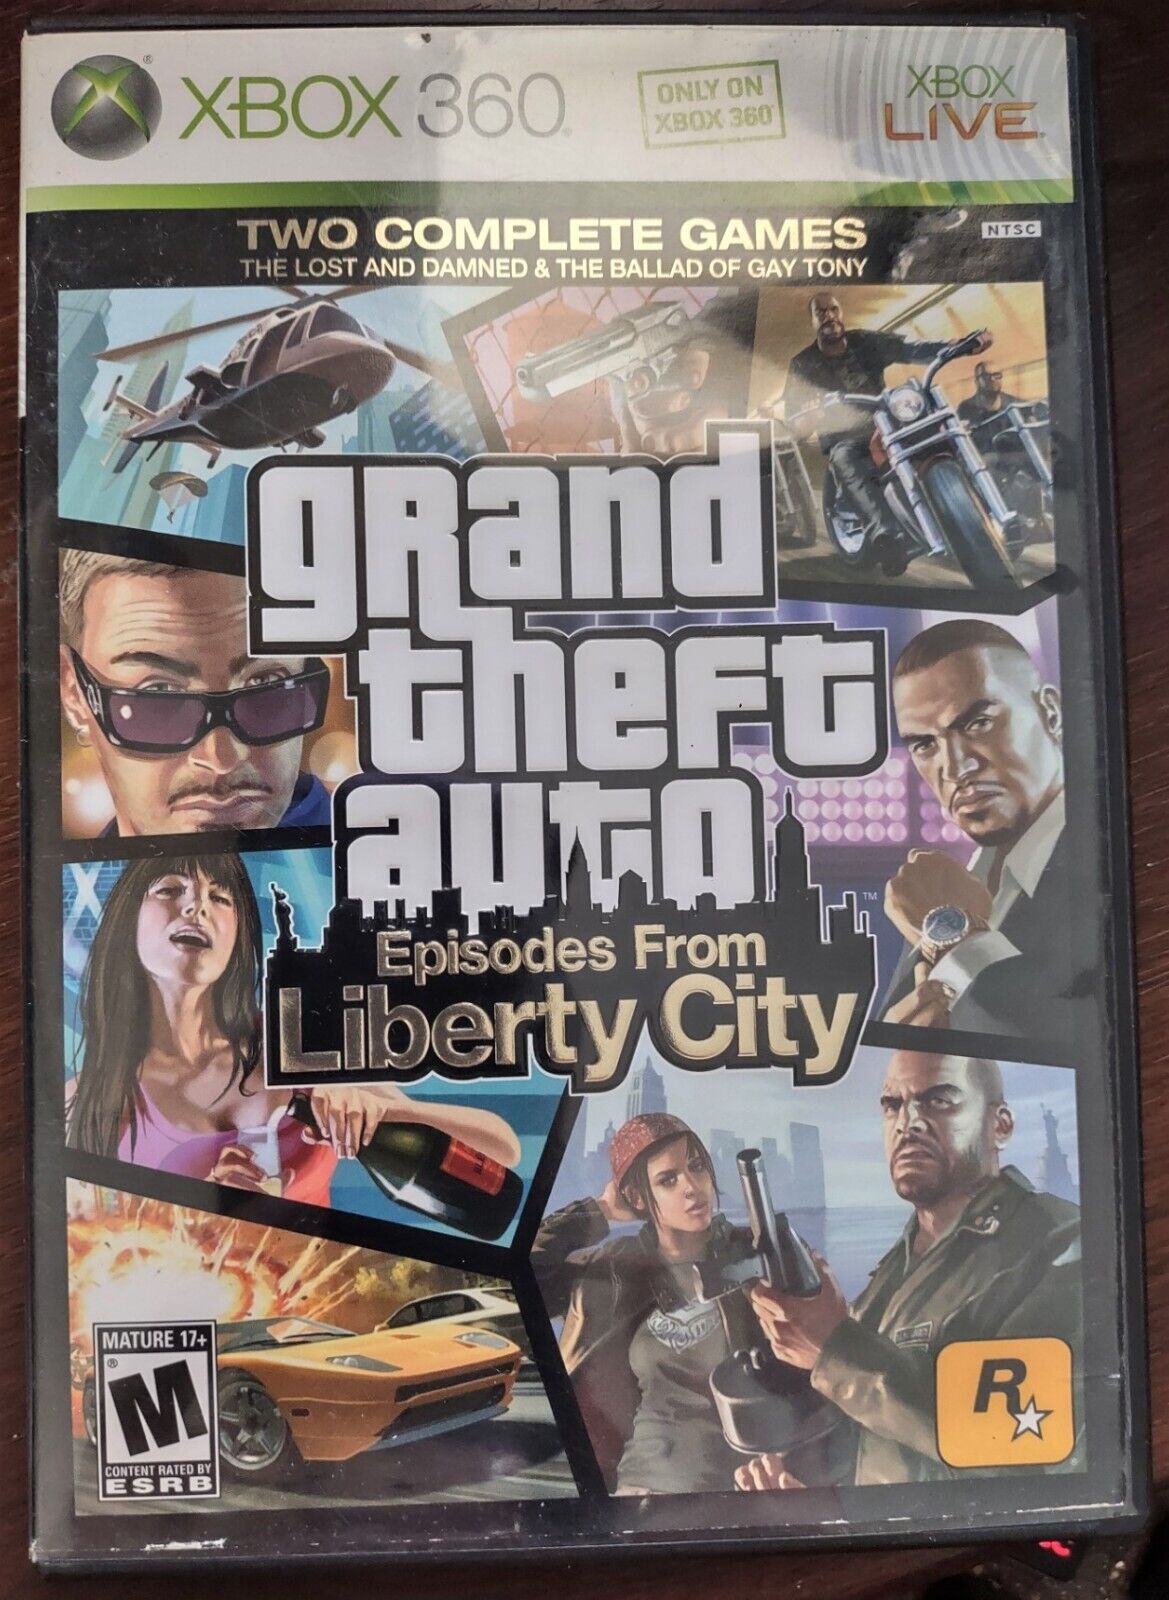 Nu schweizisk er mere end XBOX 360 : GRAND THEFT AUTO : EPISODES FROM LIBERTY CITY !! COMPLETE  w/MANUAL | eBay